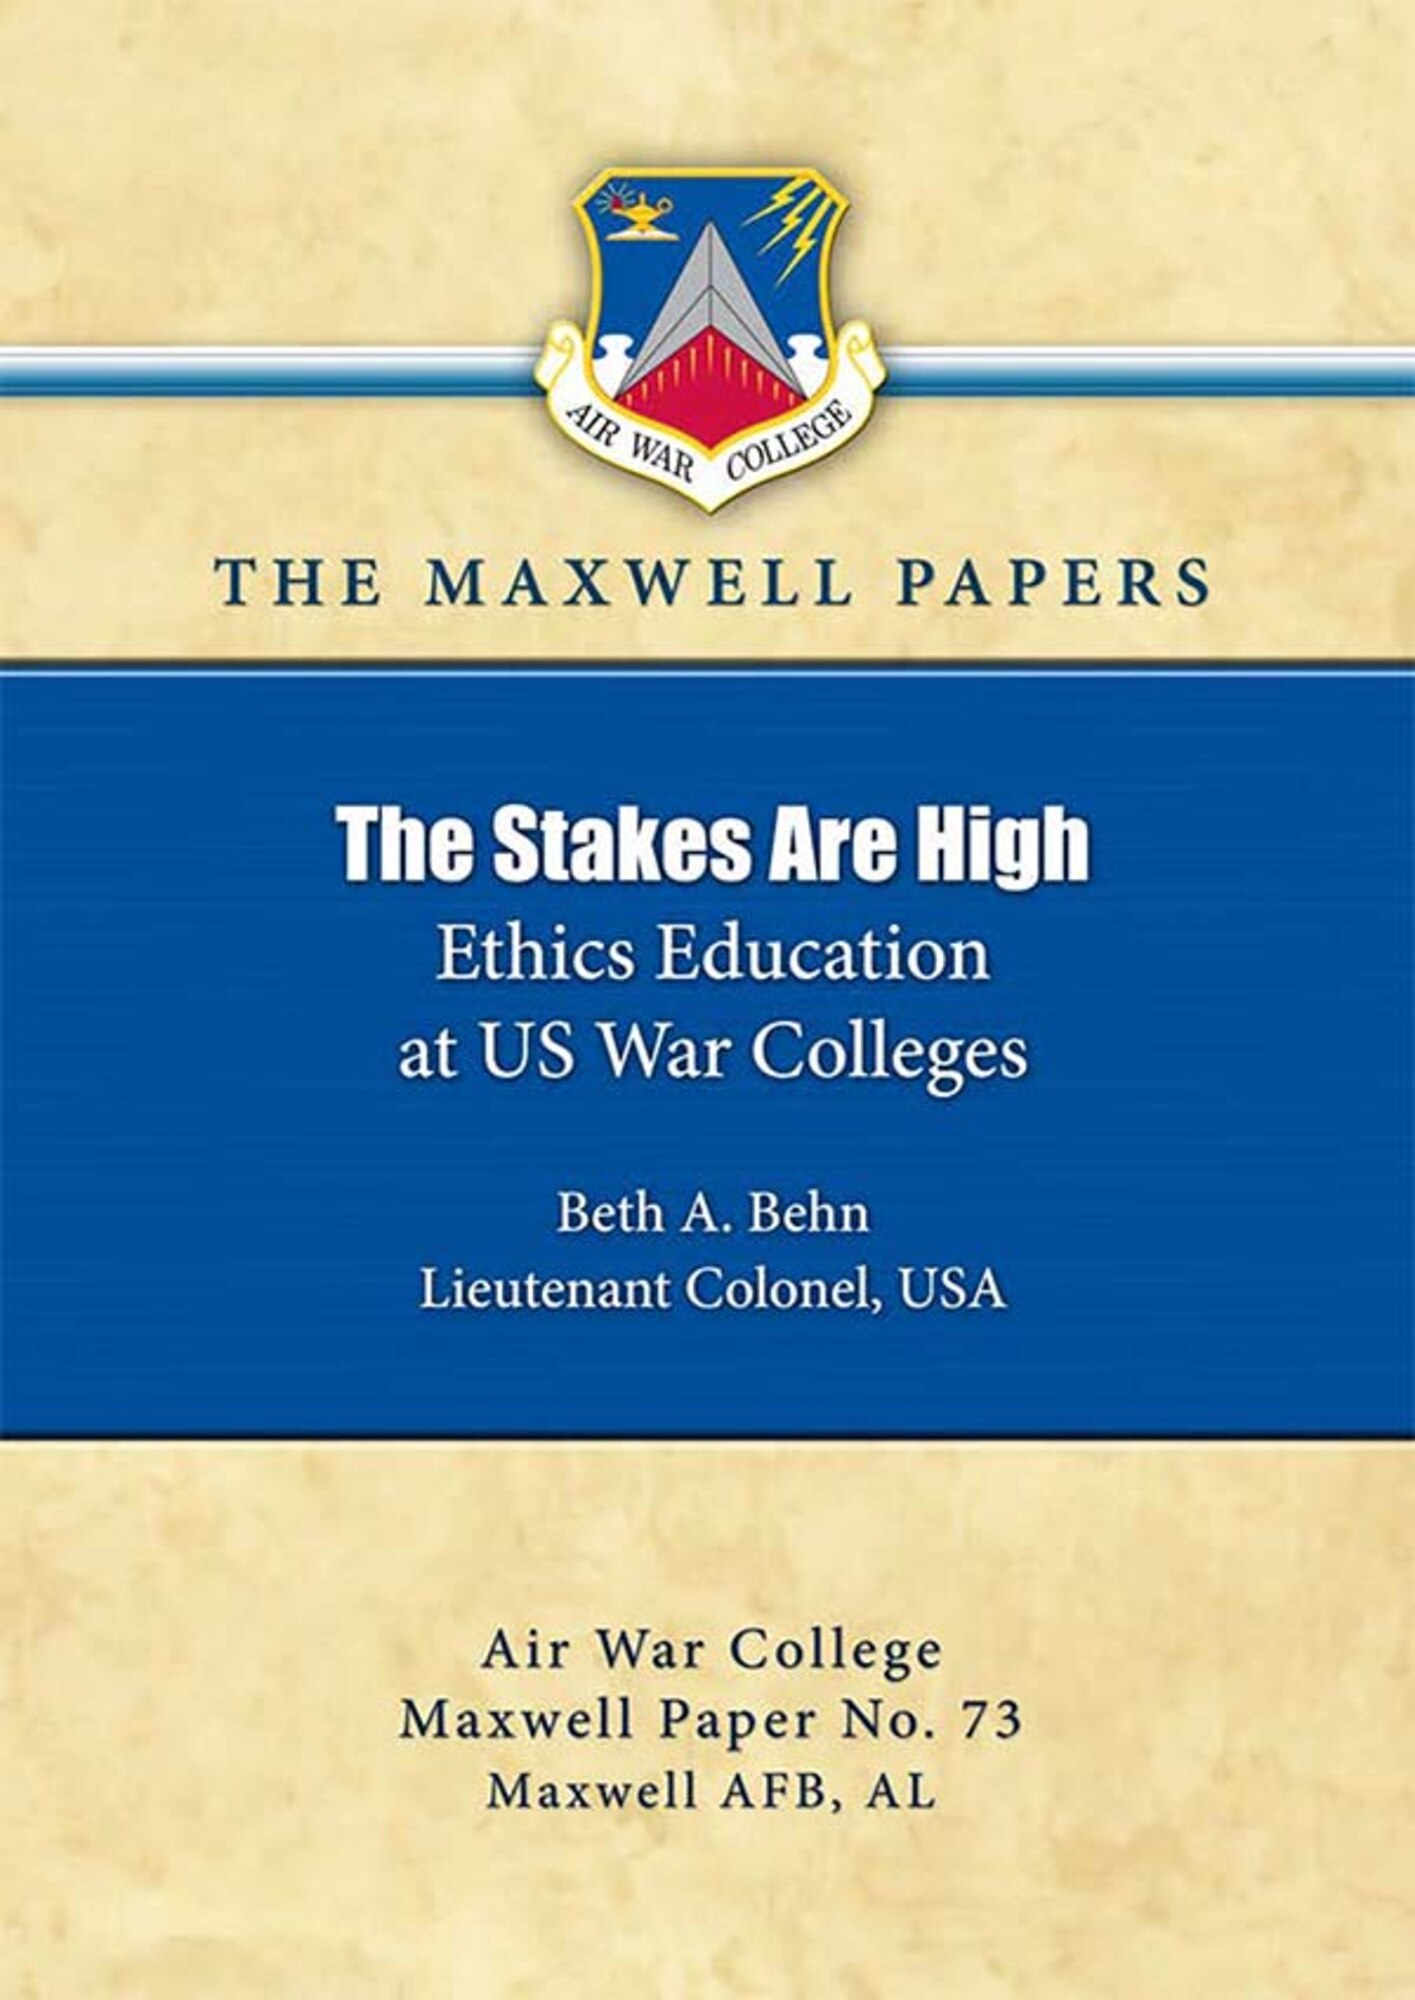 The Stakes Are High: Ethics Education at US War Colleges